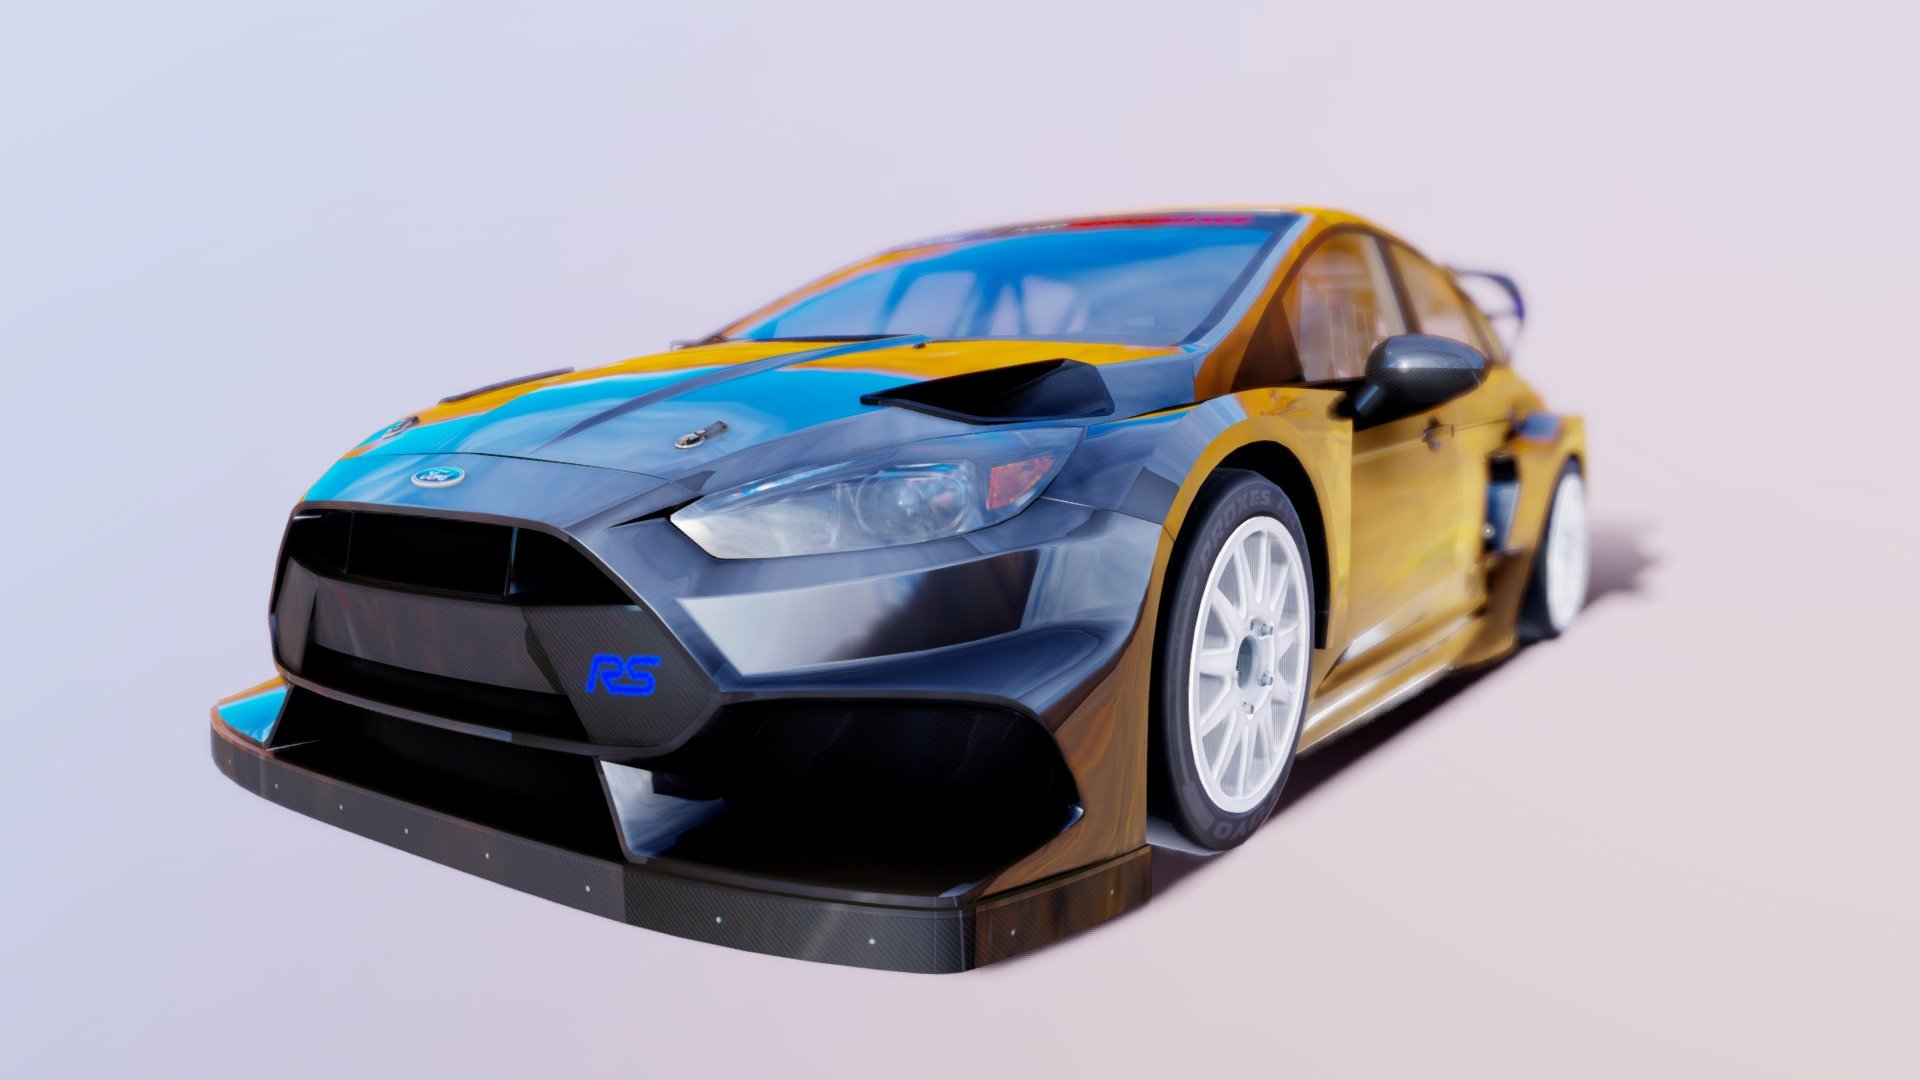 This year again, Ken Block and Andreas Bakkerud will participate in the World RX rallycross championship at the wheel of two Ford Focus RS specially designed for the discipline. And for the occasion, the two pilots will wear particularly unusual decorations - Ken Block | Ford Focus RS RX Gymkhana - Download Free 3D model by kevin (ケビン) (@sohyalebret) 3d model